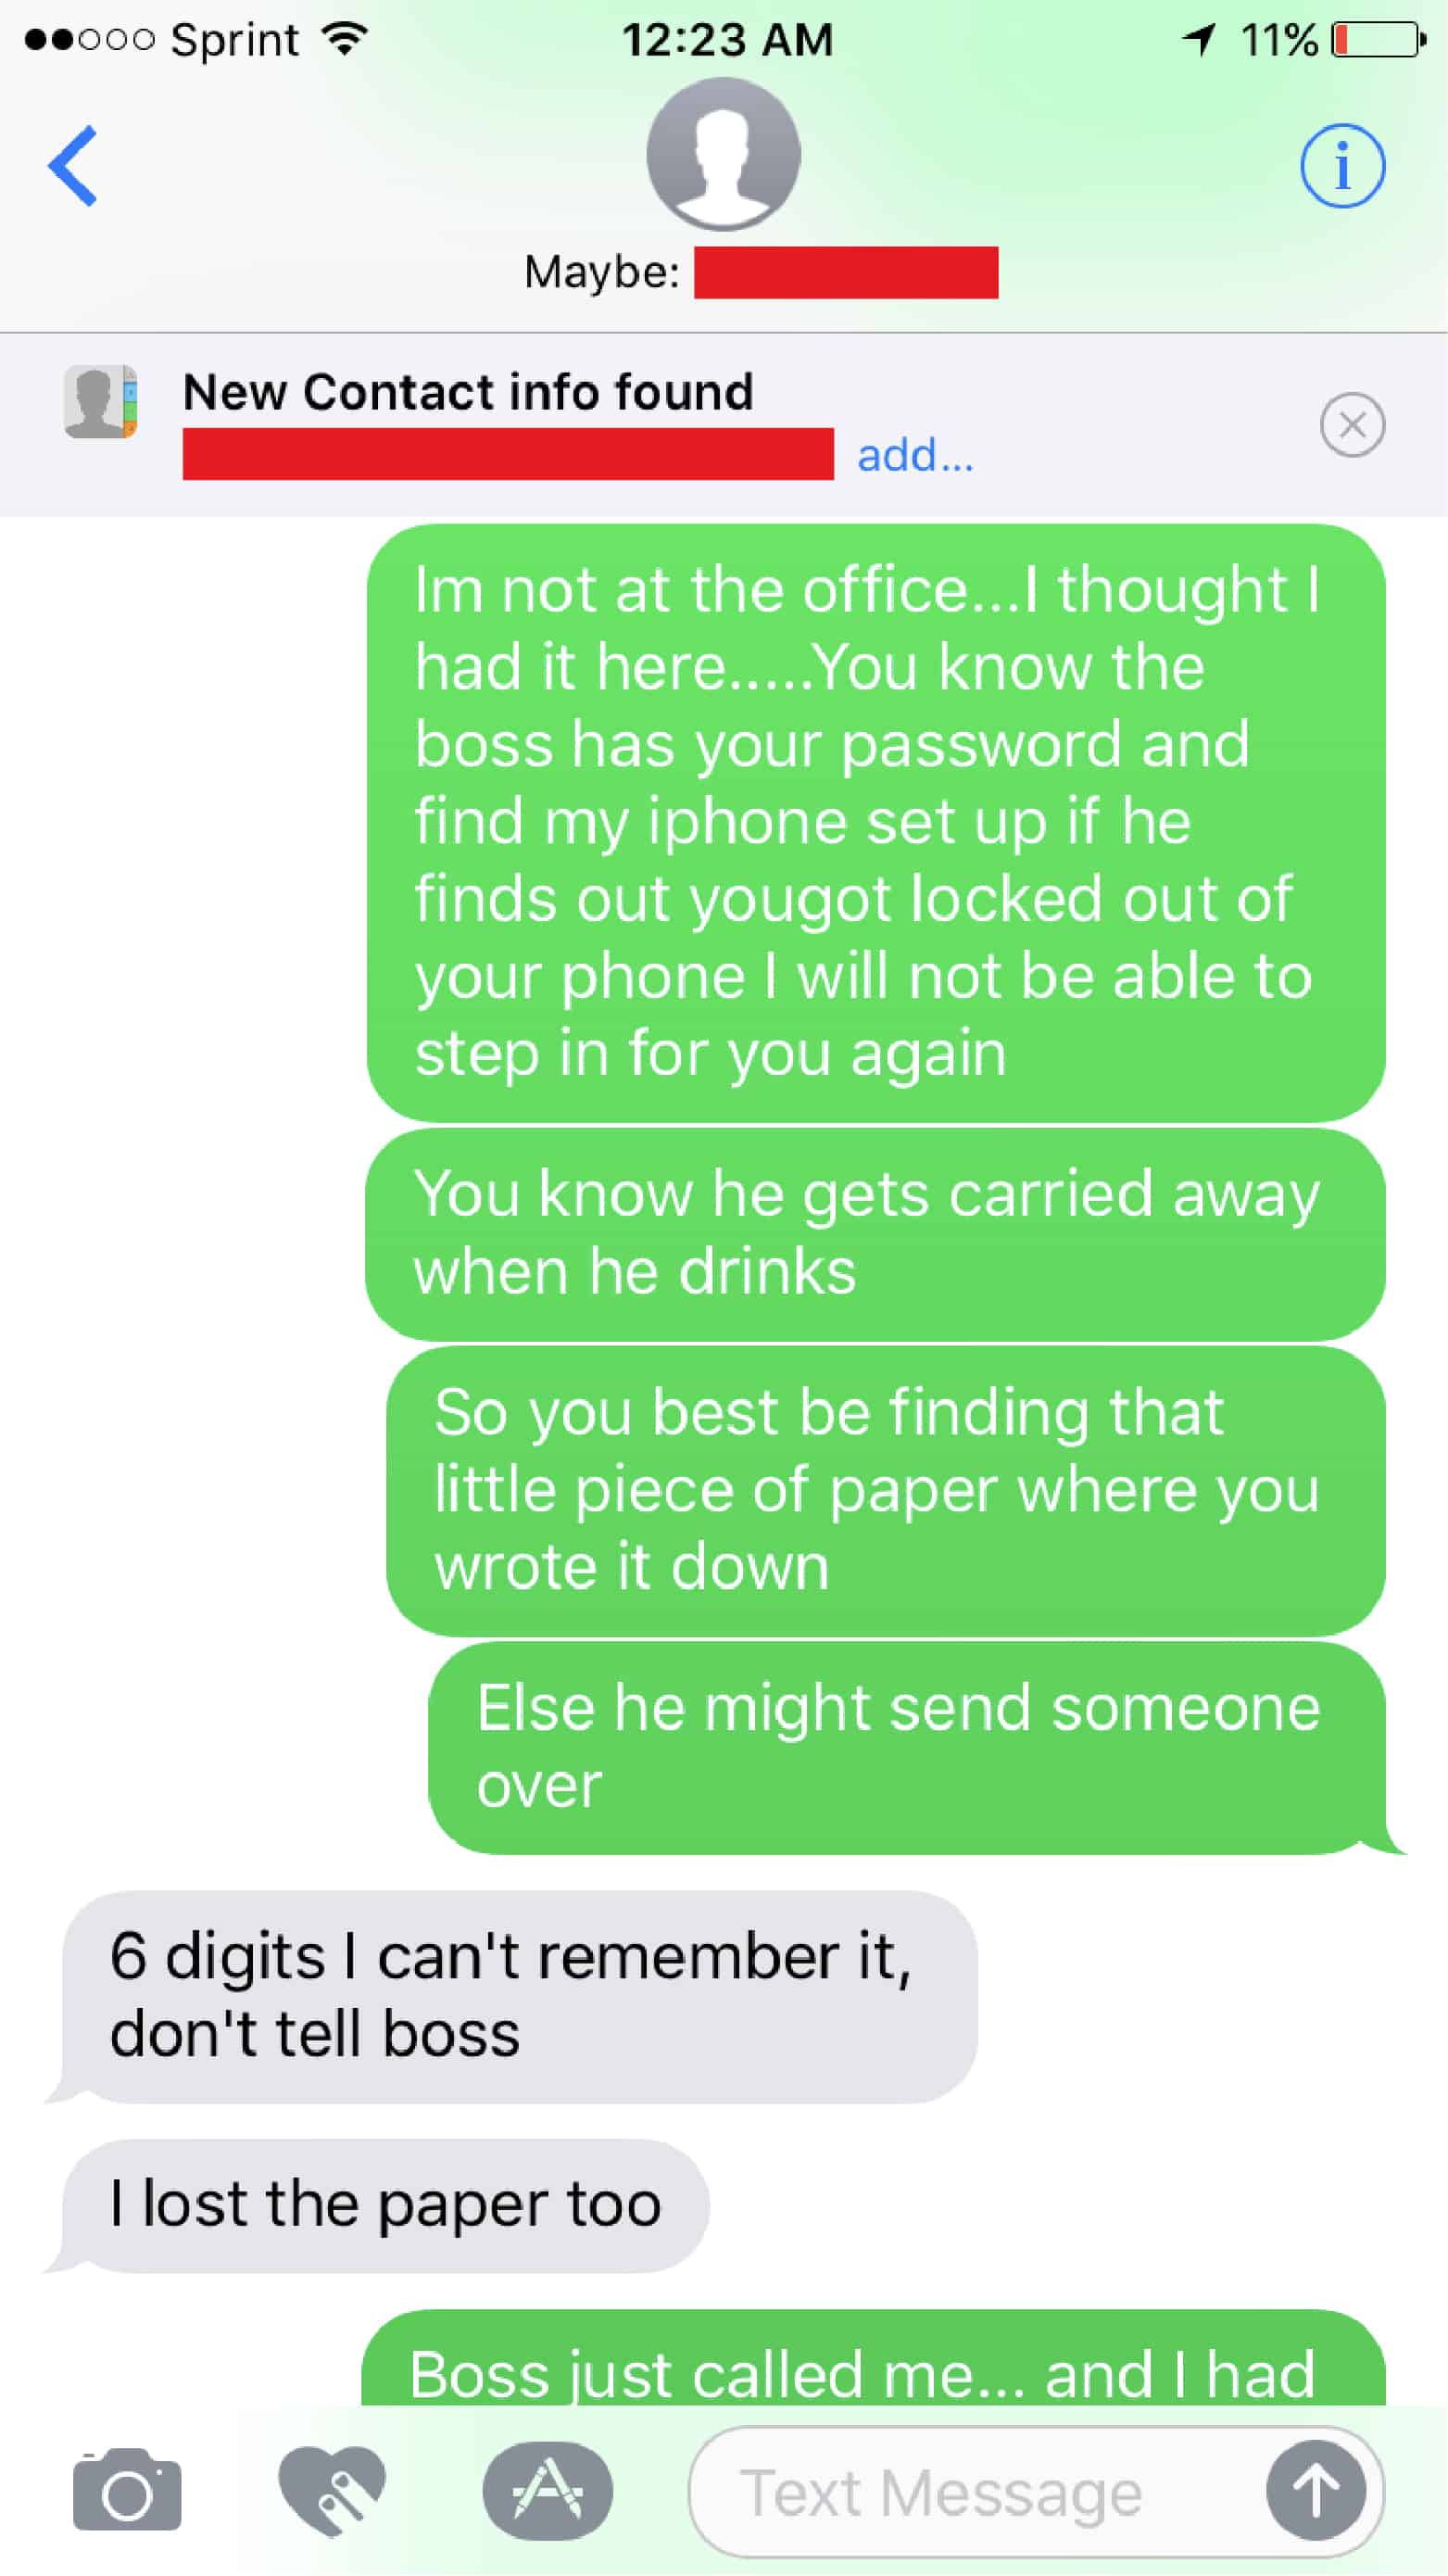 iphone thief trolled